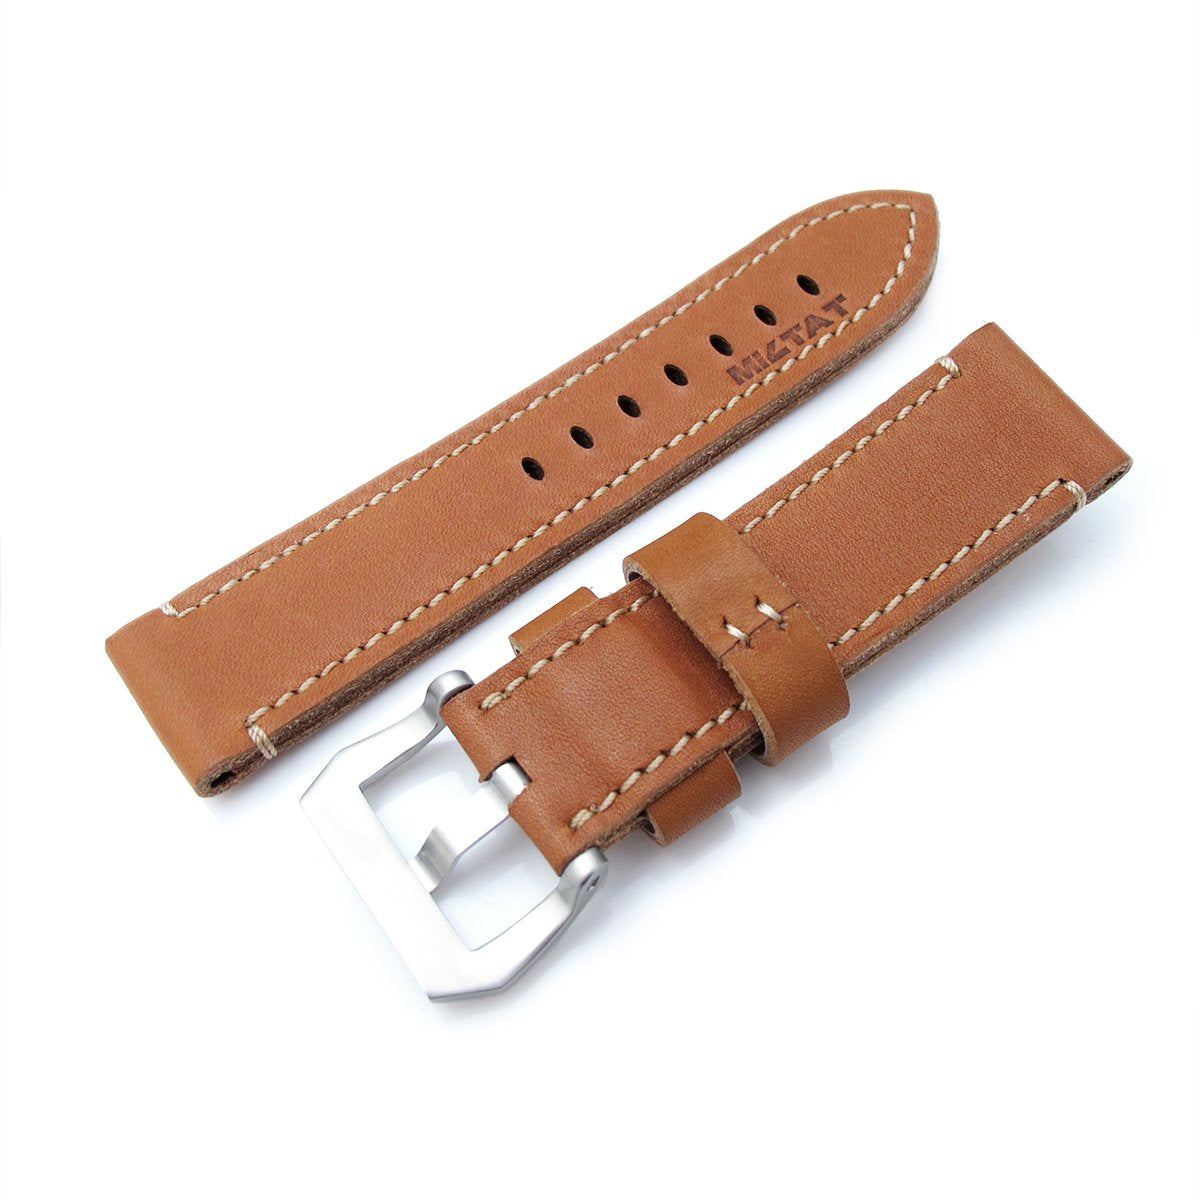 24mm MiLTAT Cashmere Calf Tan Color Watch Strap Beige Hand Stitches Strapcode Watch Bands